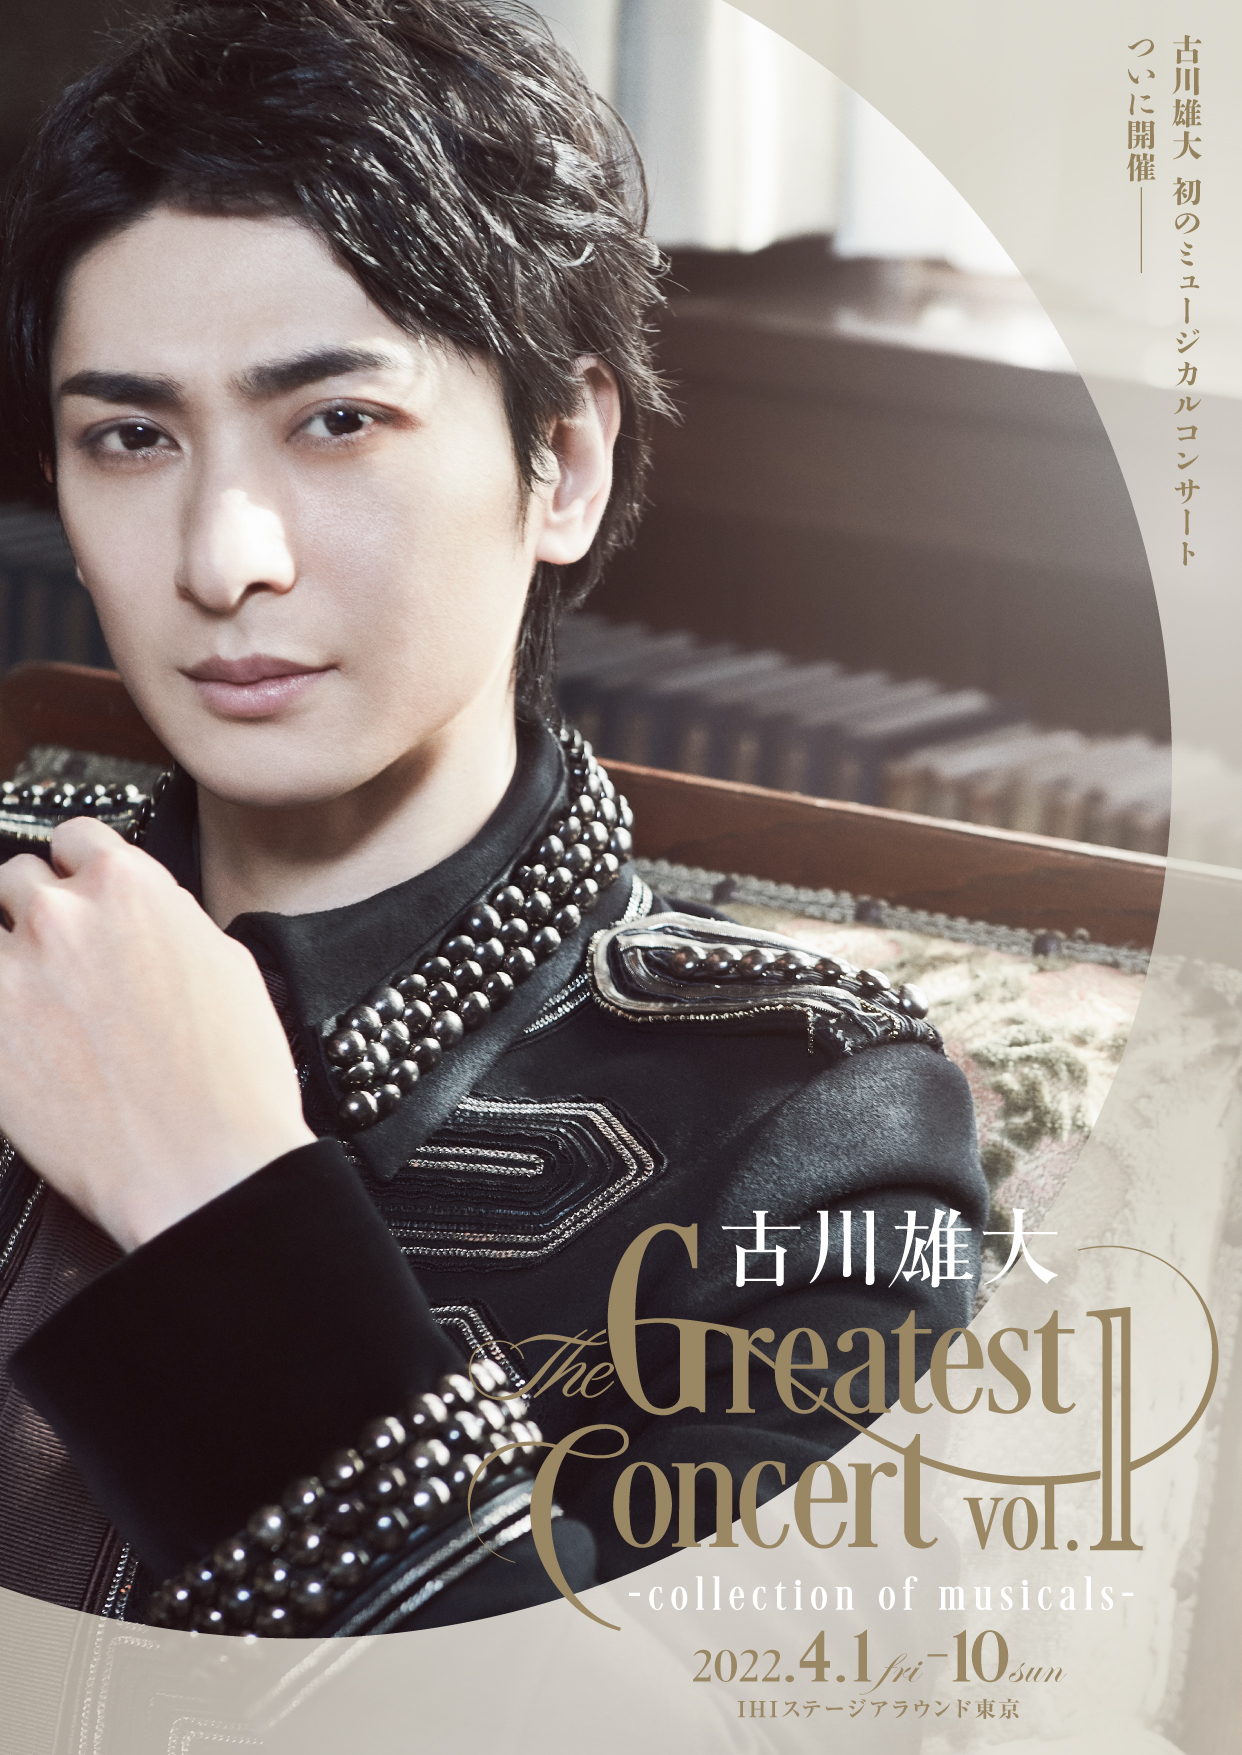 LIVE 『古川雄大 The Greatest Concert vol.1 -collection of musicals-』